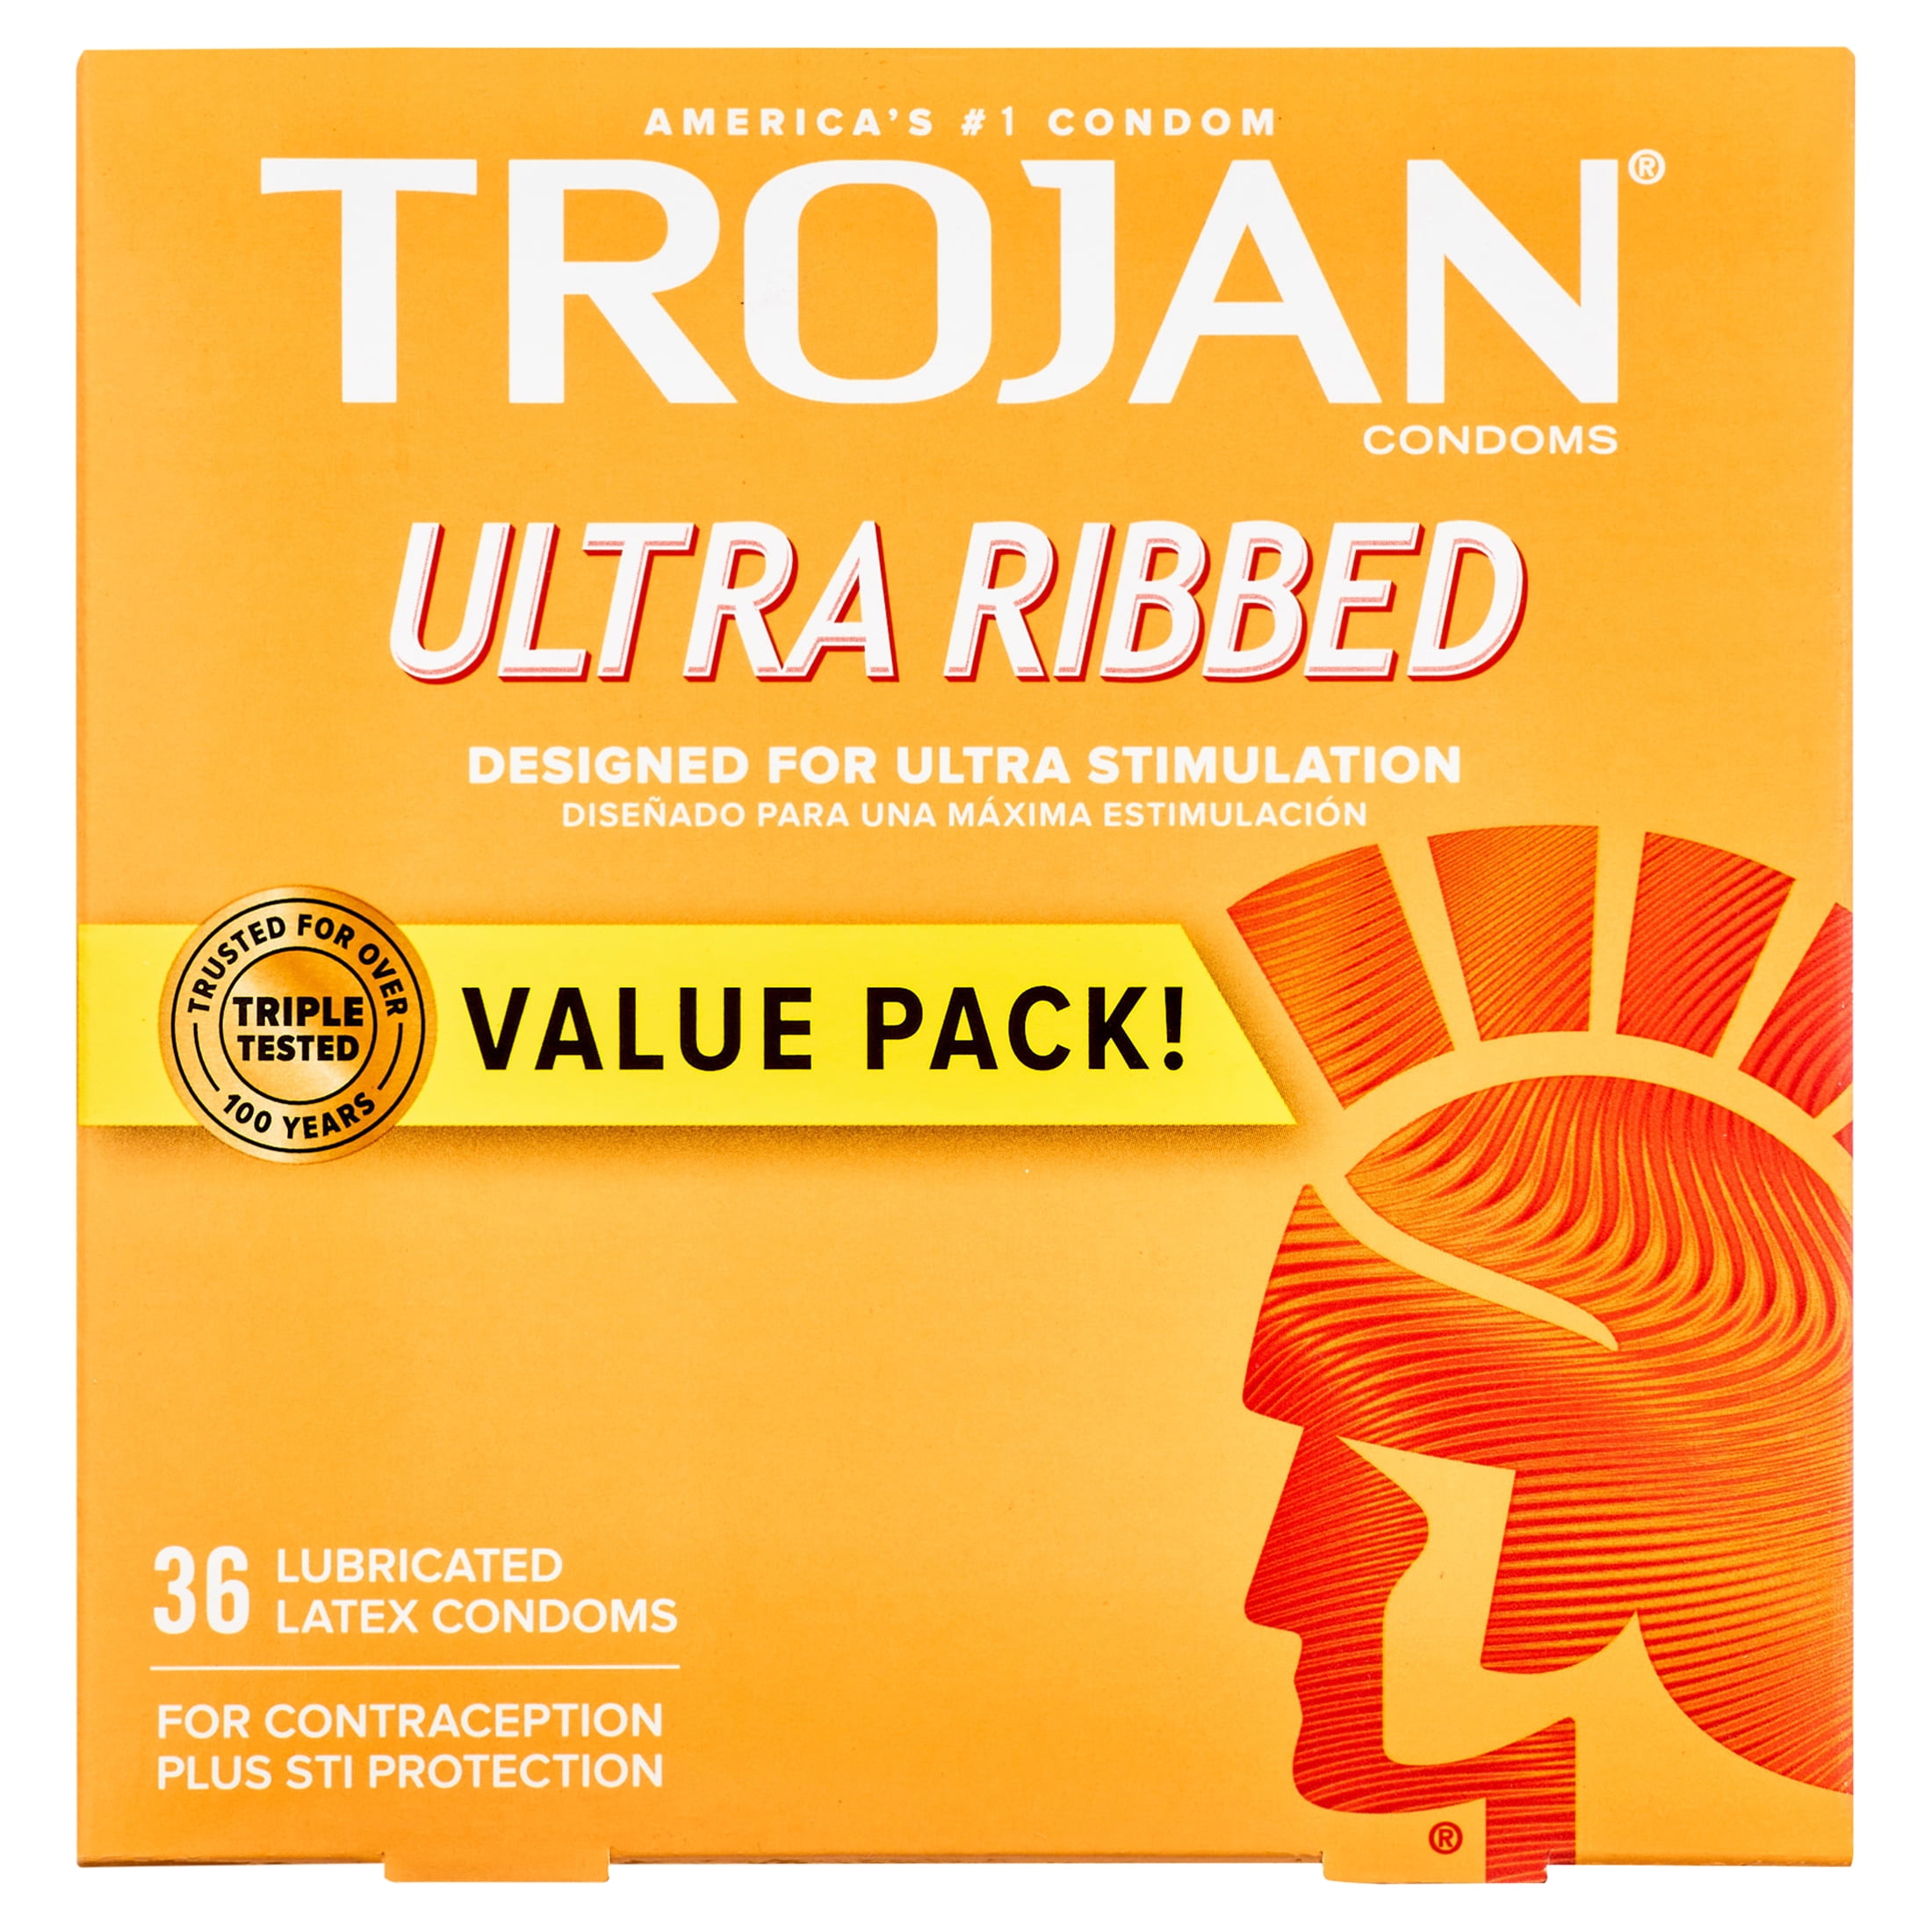 TROJAN Ultra Thin Condoms, 36 Count Value Pack, Lubricated for Ultra  Sensitivity